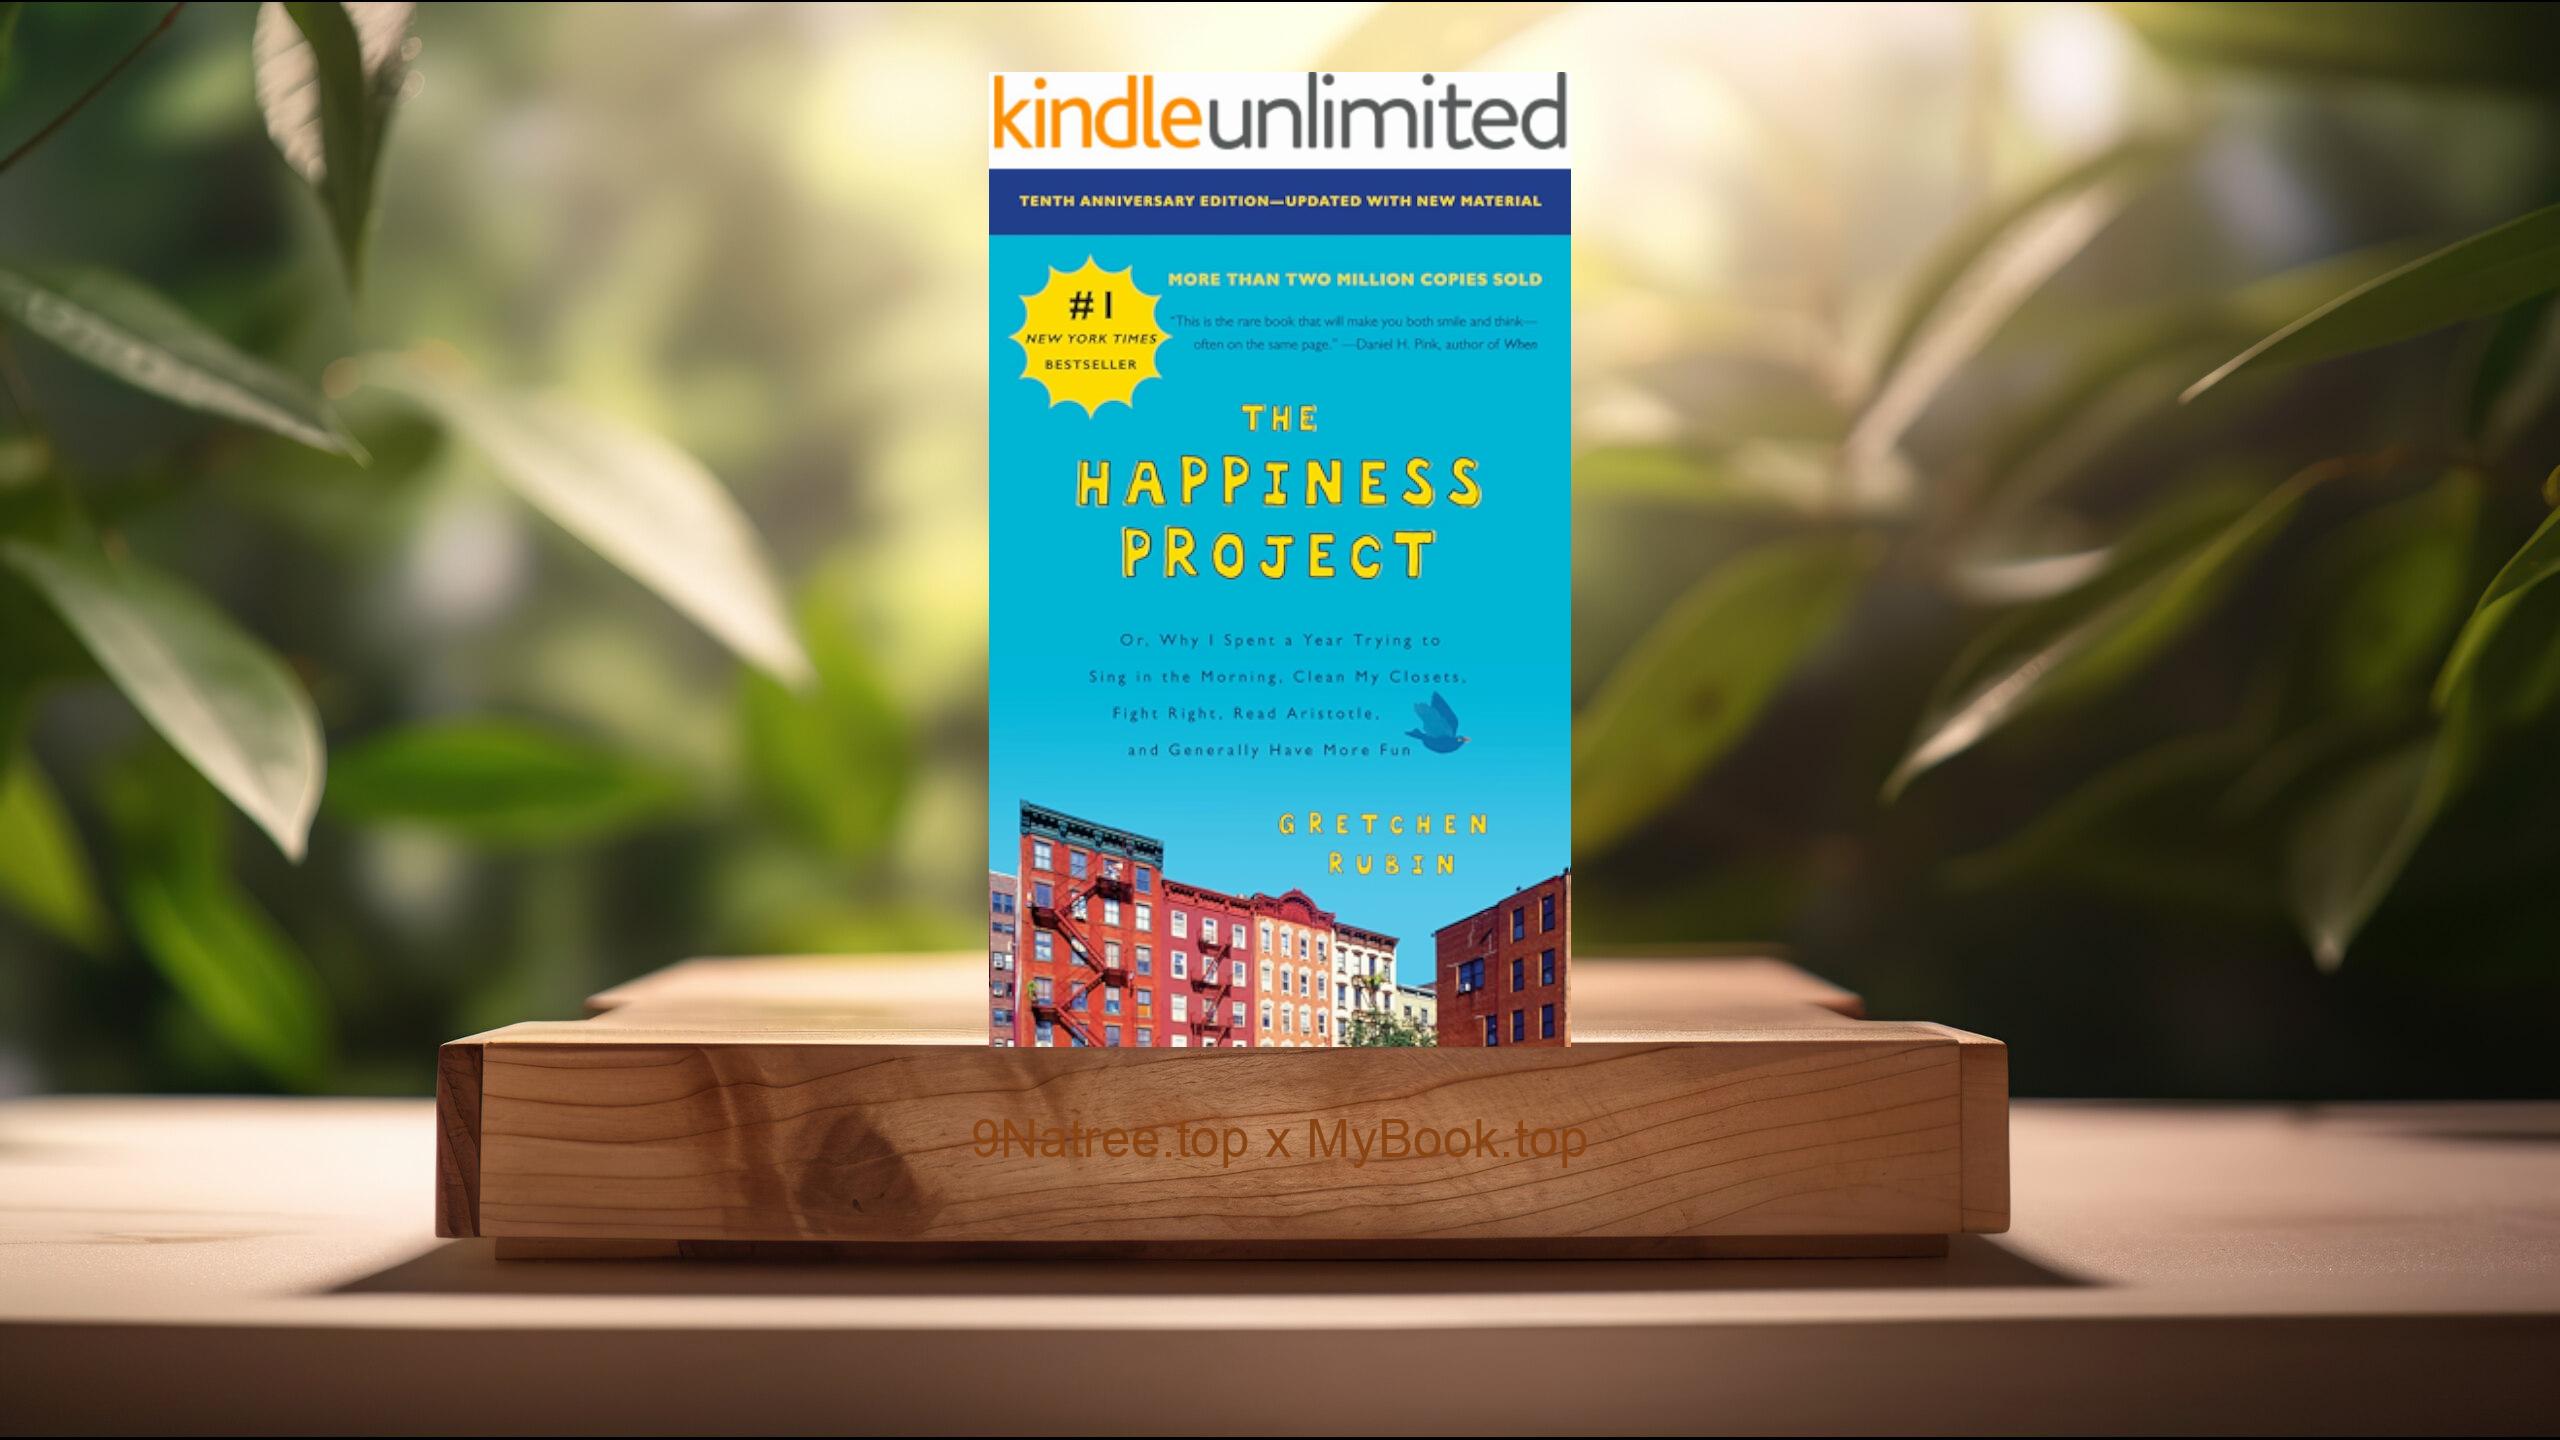 [Review] The Happiness Project, Tenth Anniversary Edition (Gretchen Rubin) Summarized